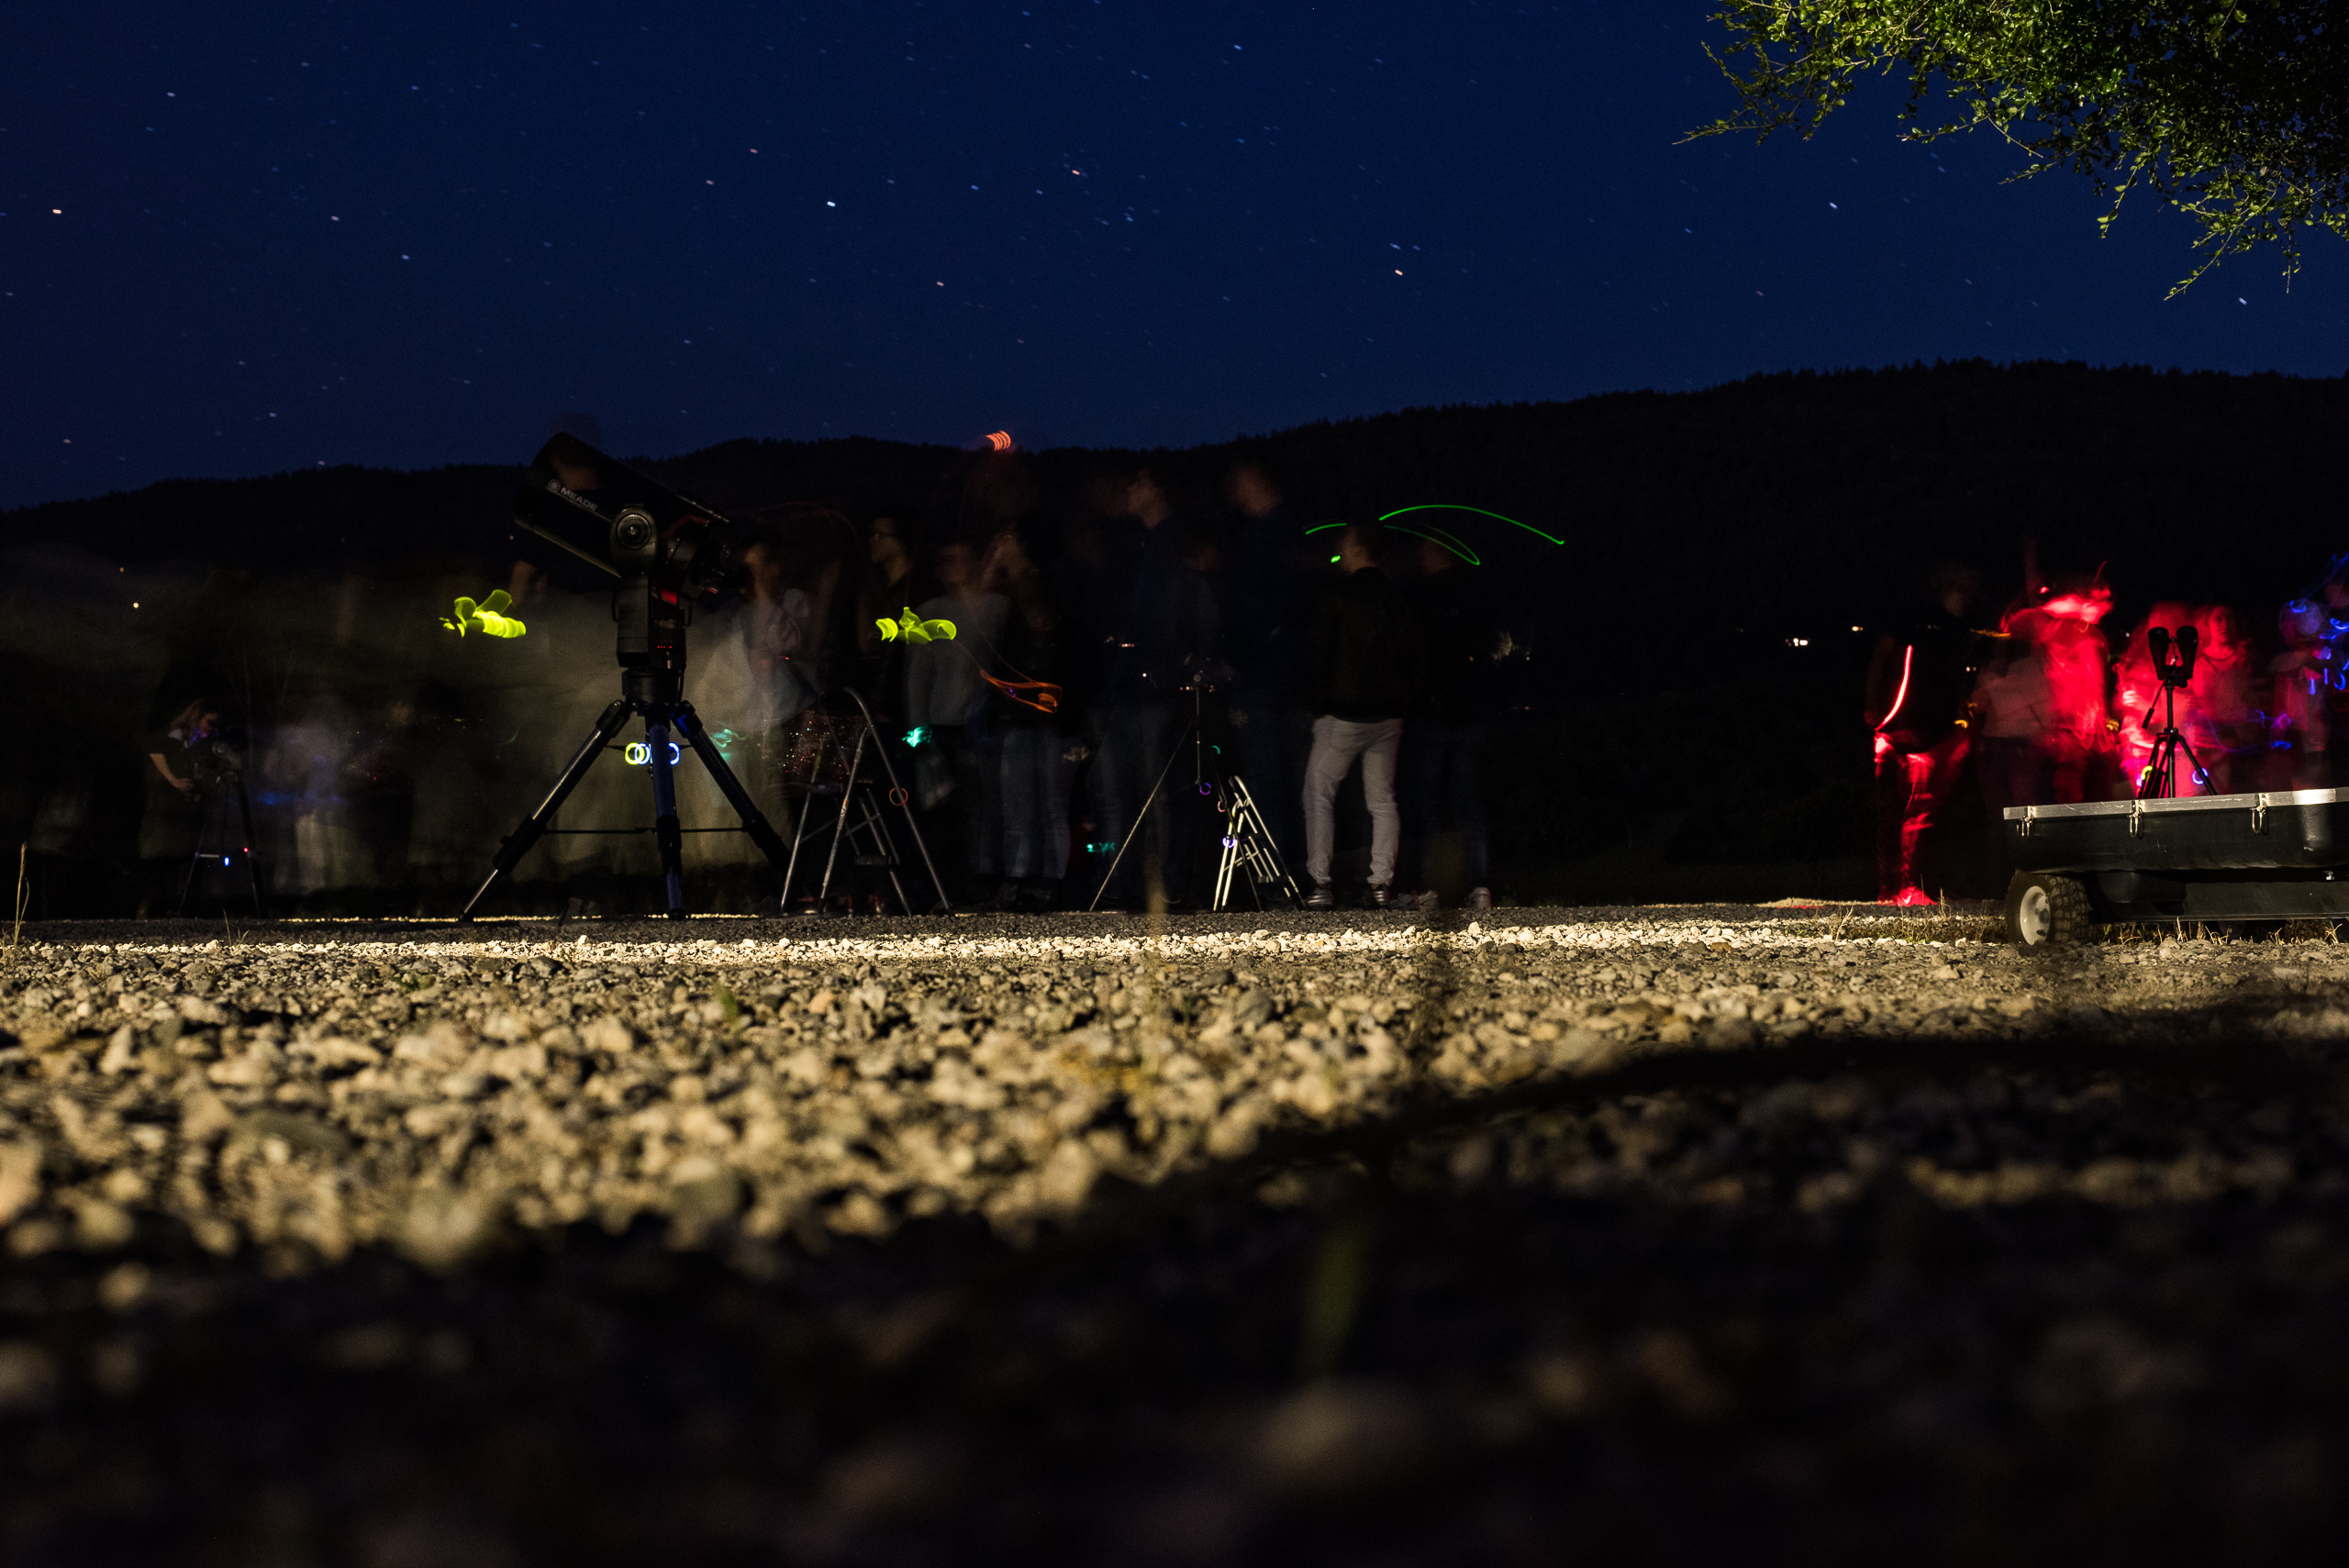 Star party guests celebrating around the telescopes with light sticks